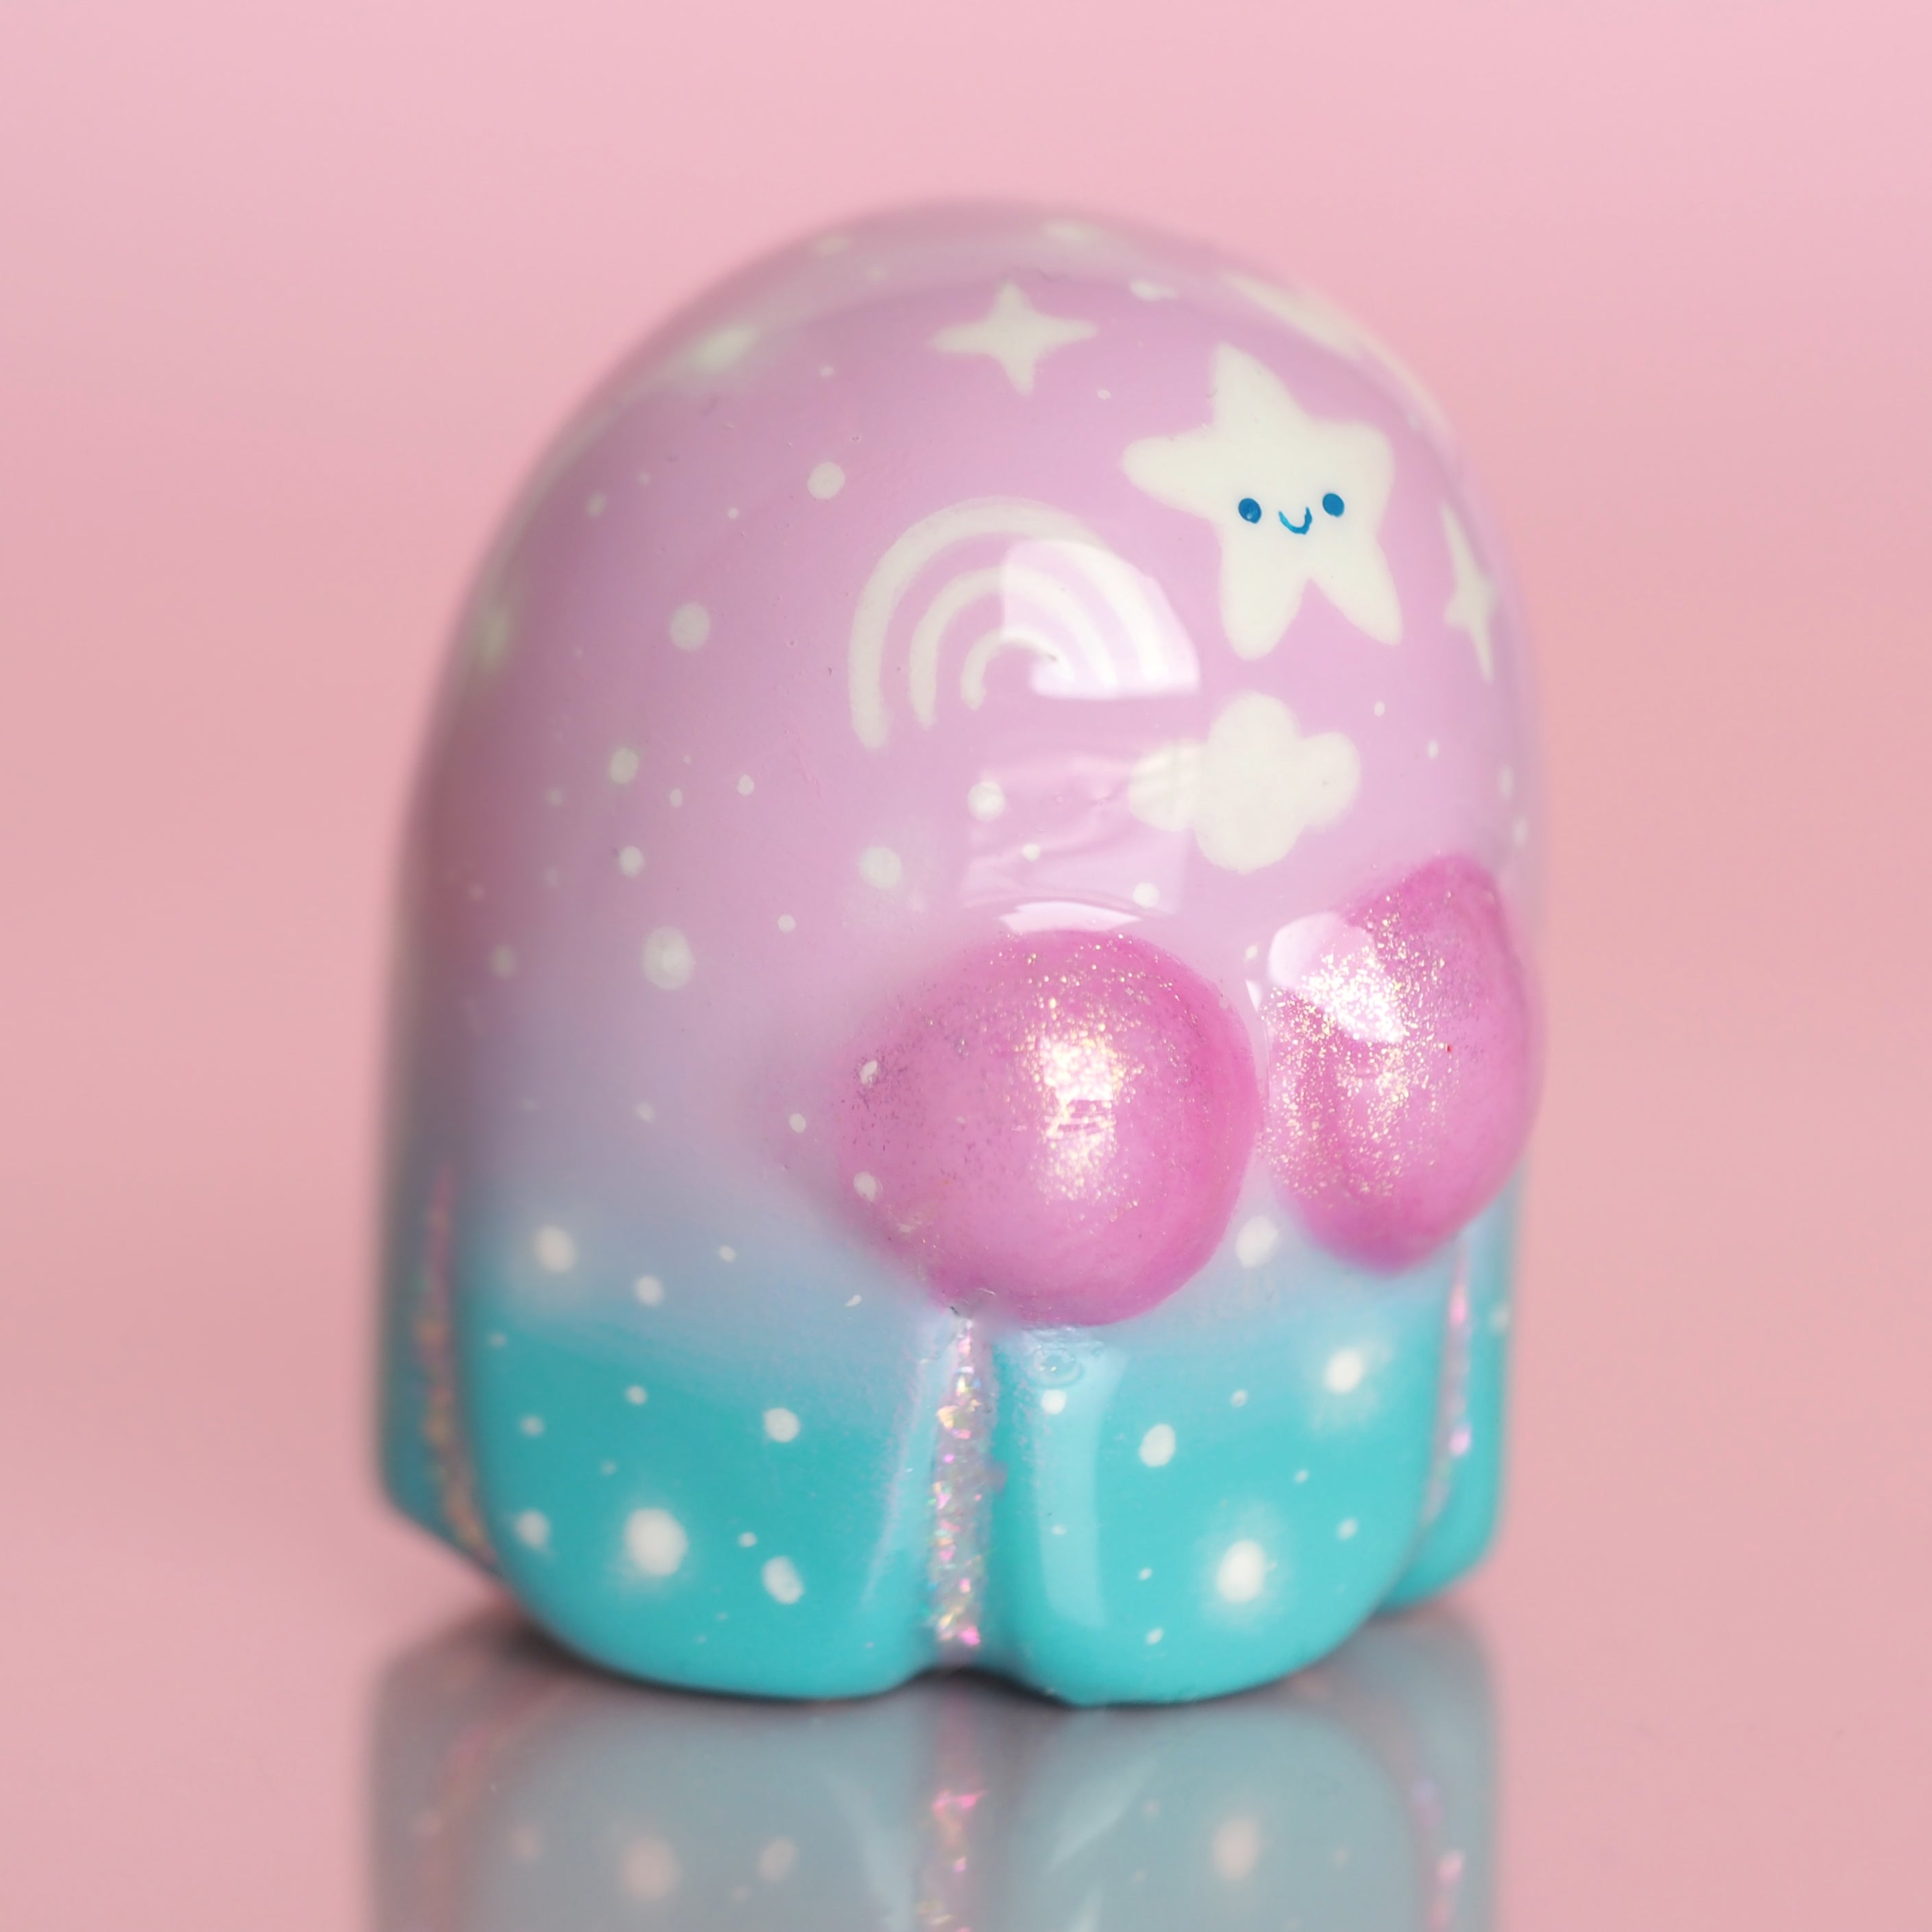 Starry Ghostling (Handmade polymer clay sculpture)